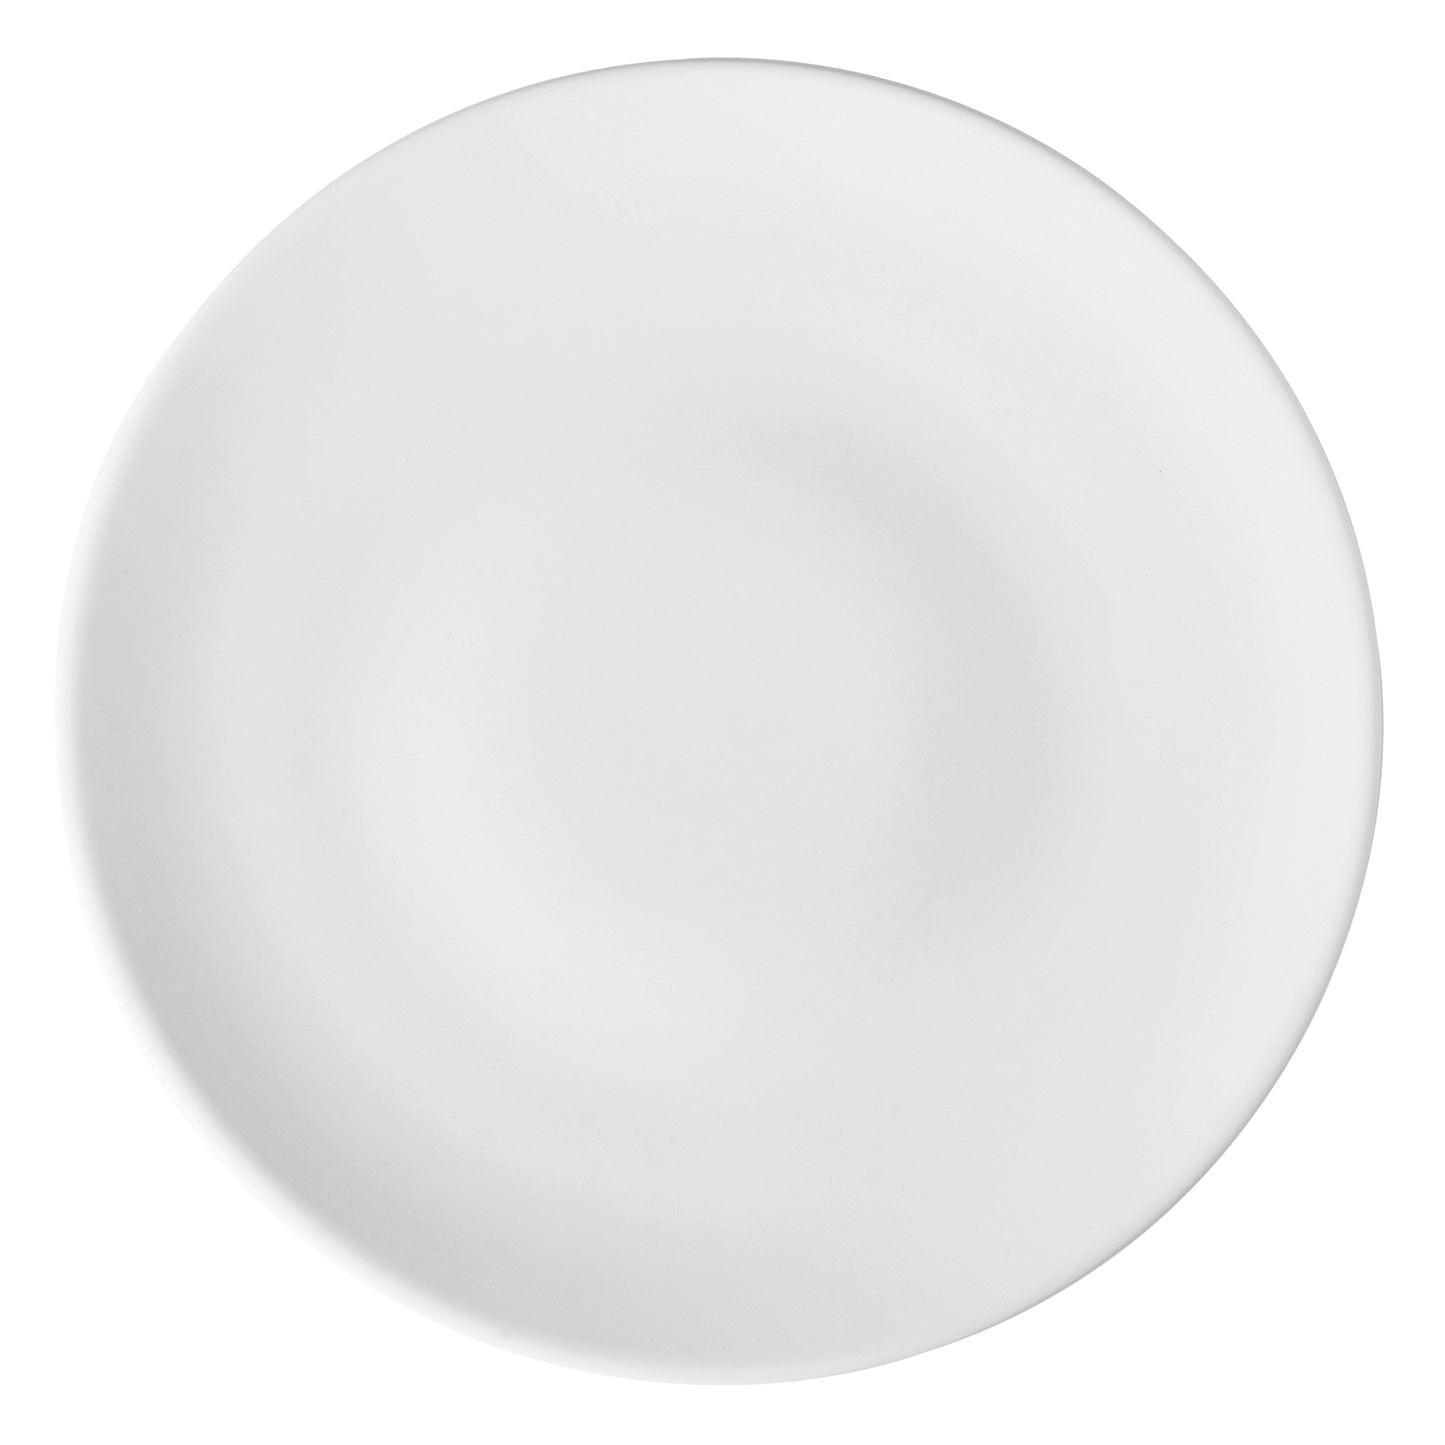 9" Bright White Porcelain Coupe Plate, Corona Actualite (Stocked) (12 Pack)